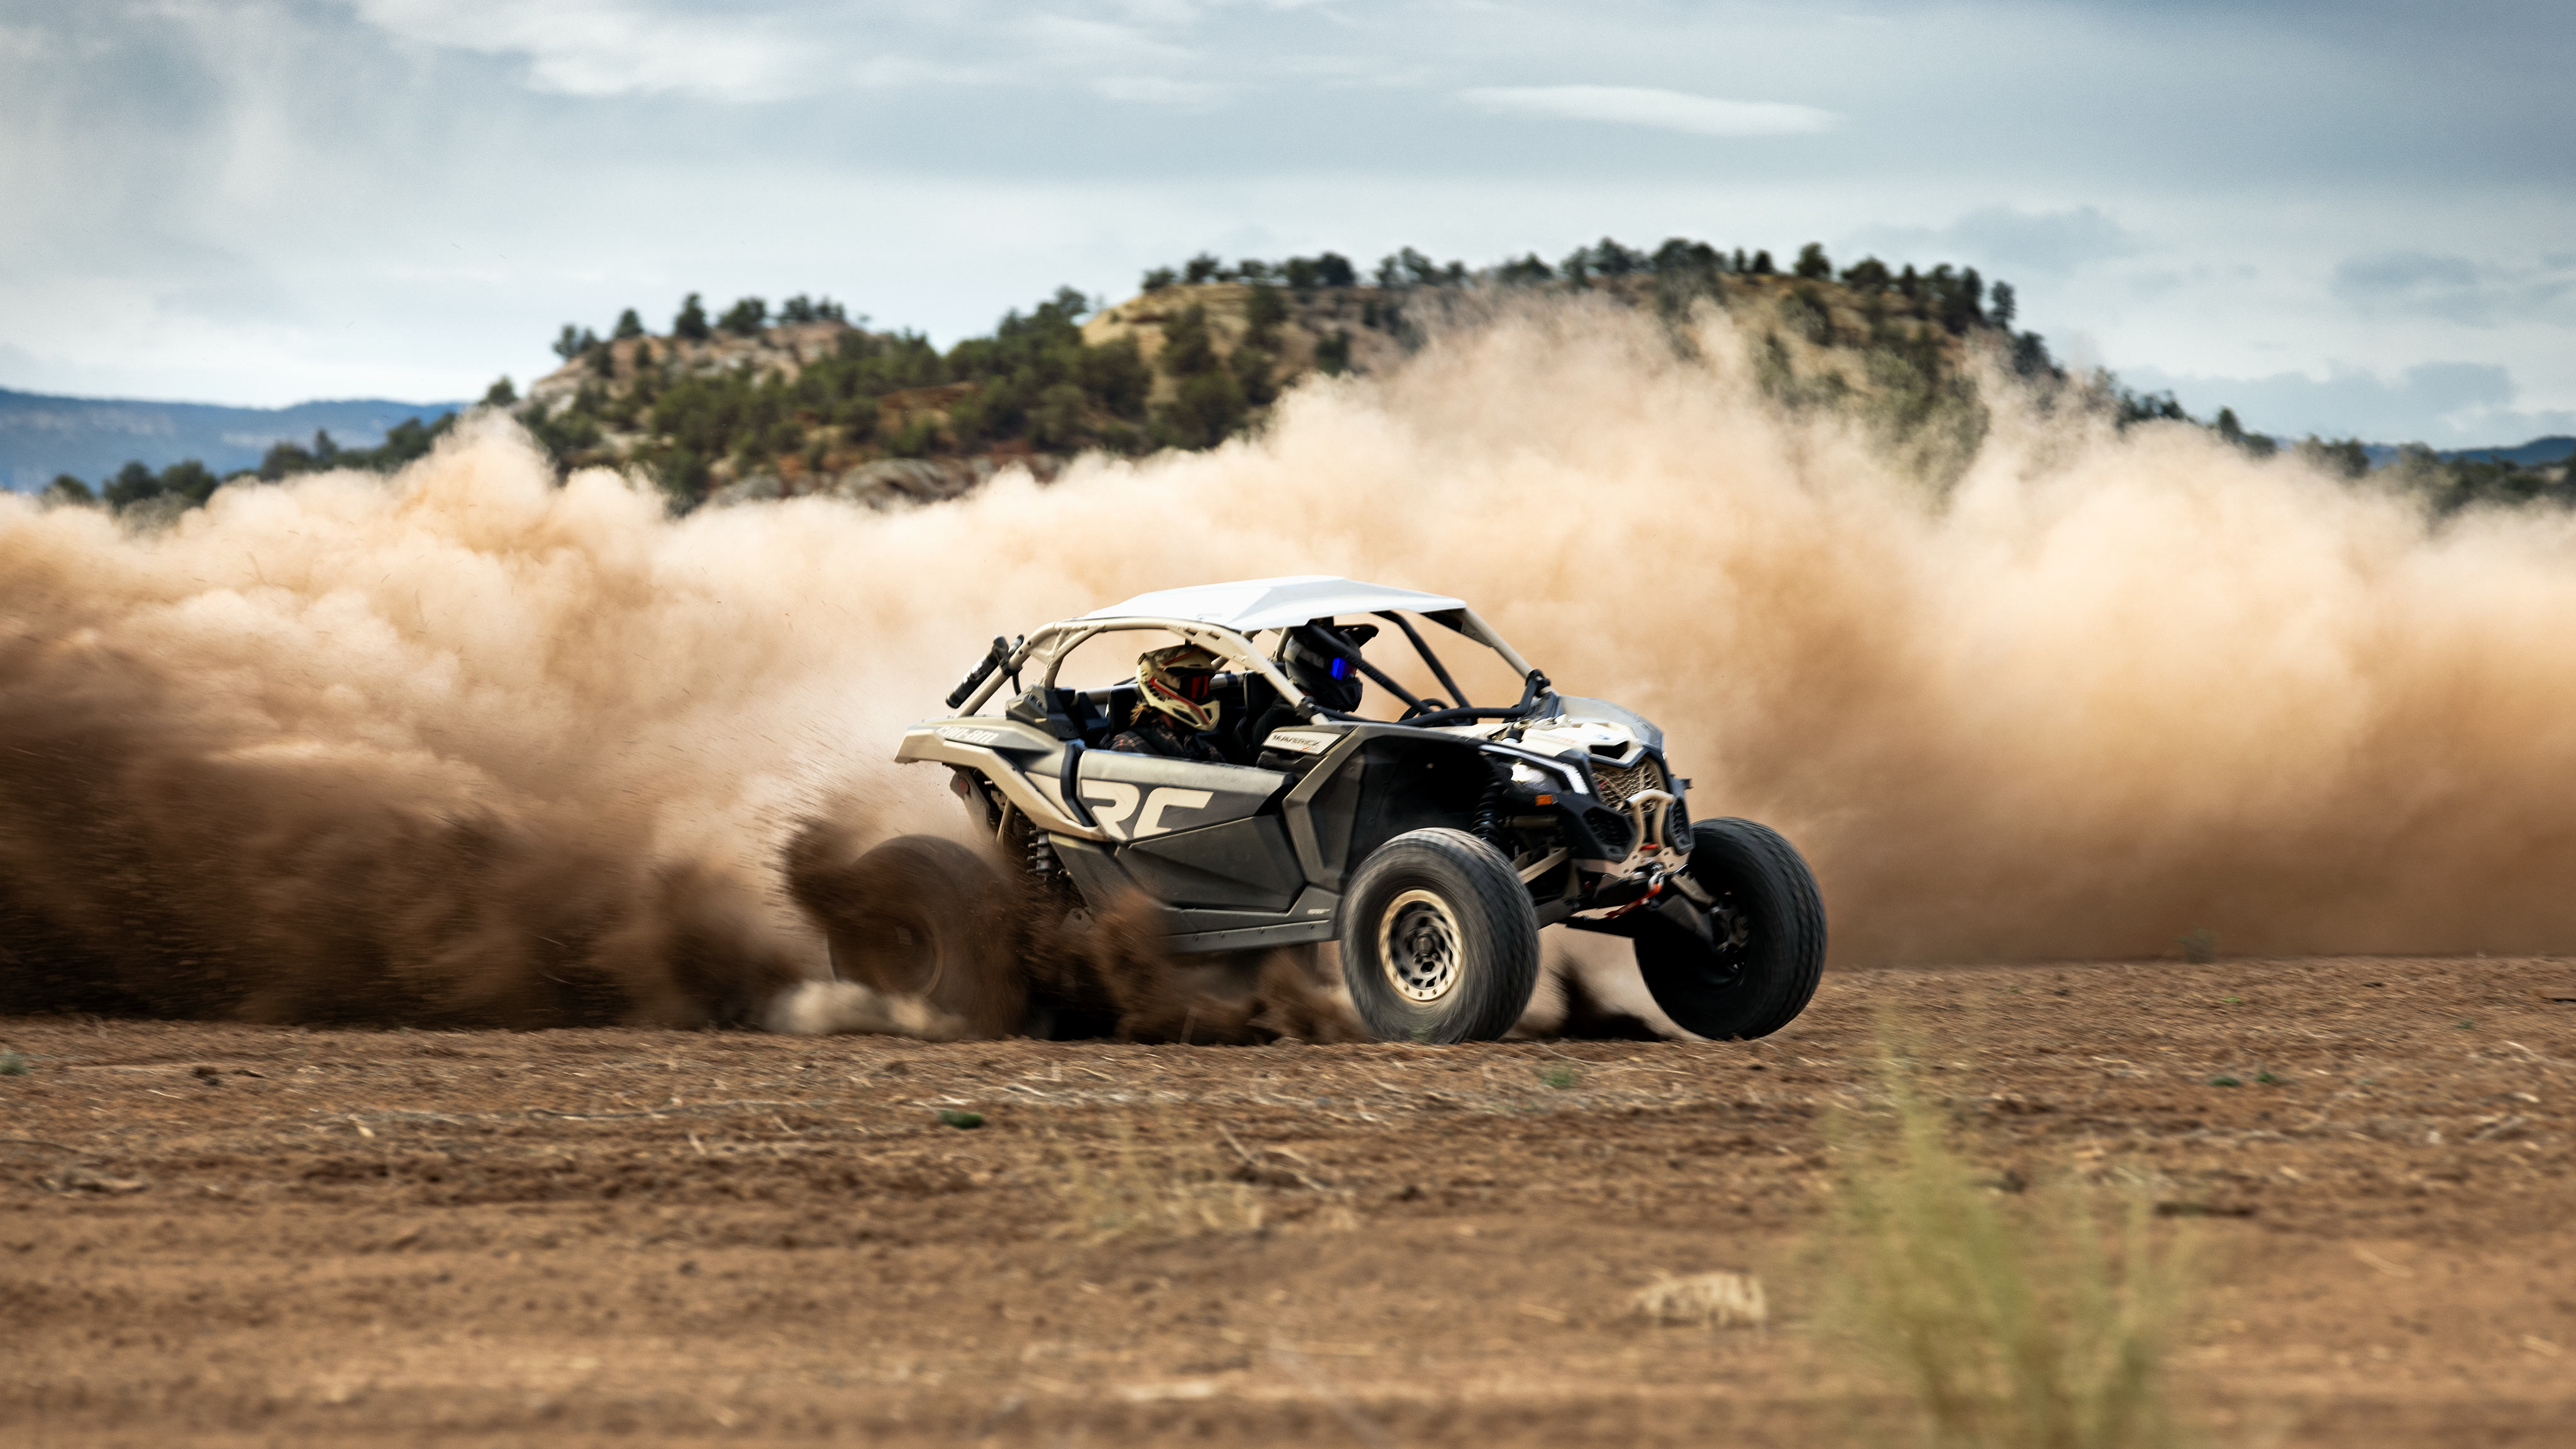 A Mineral Grey and Desert Tan Can-Am Maverick RC 72 Turbo RR kicking up dust